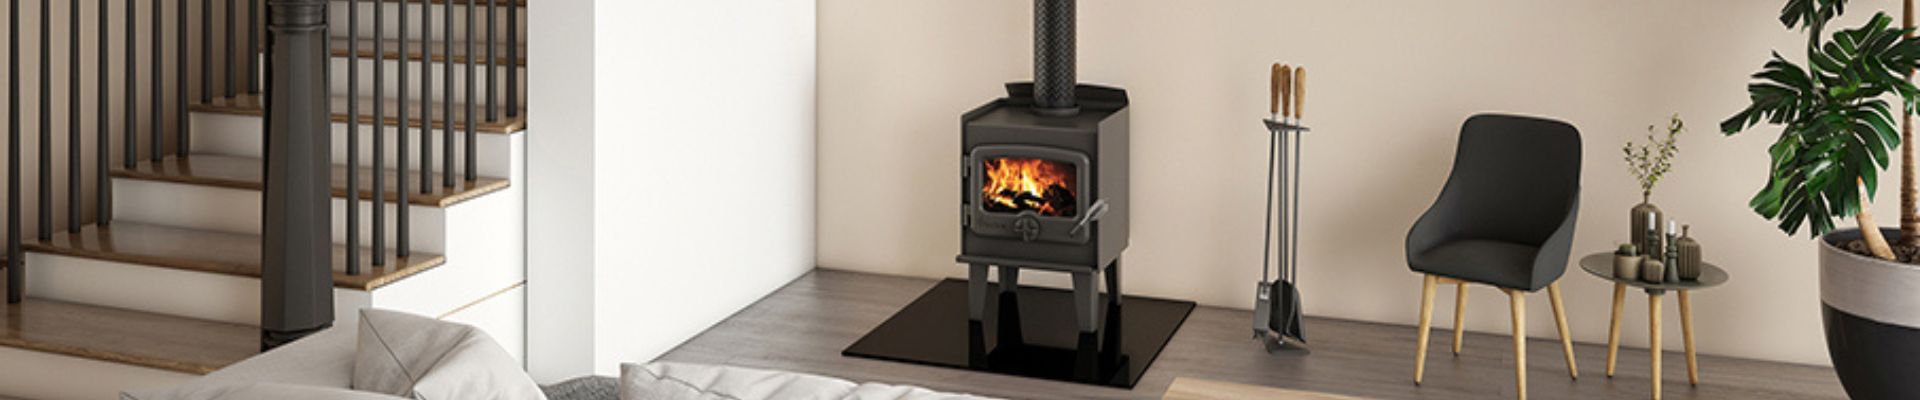 Nectre Wood Heaters: Timeless Warmth and Quality